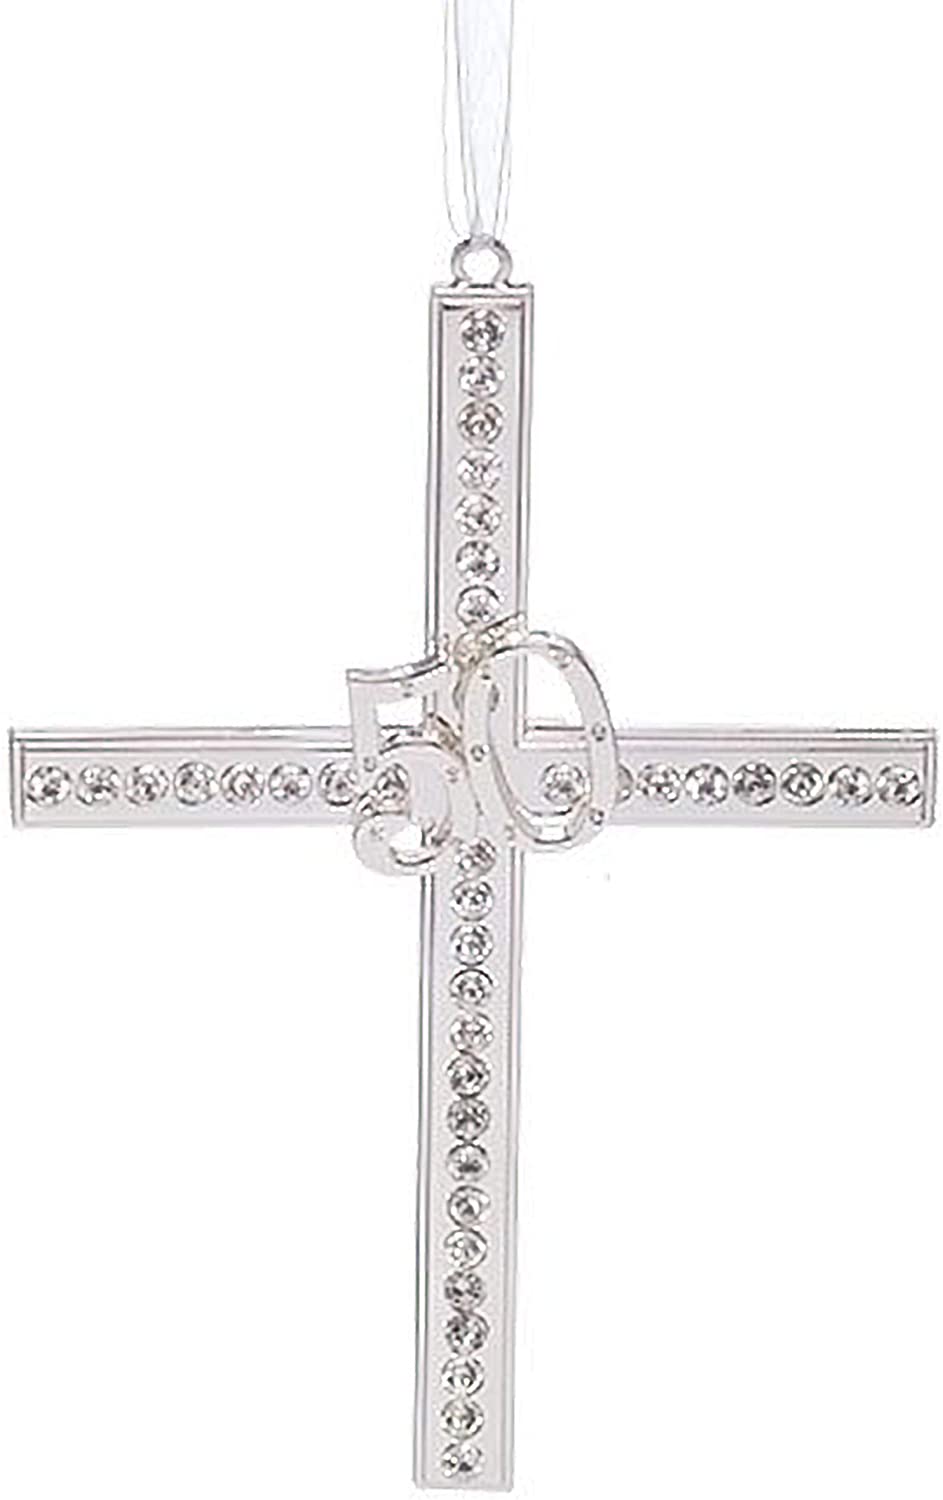 50 Anniversary Silver Tone With Jewel Accents  Wall Cross